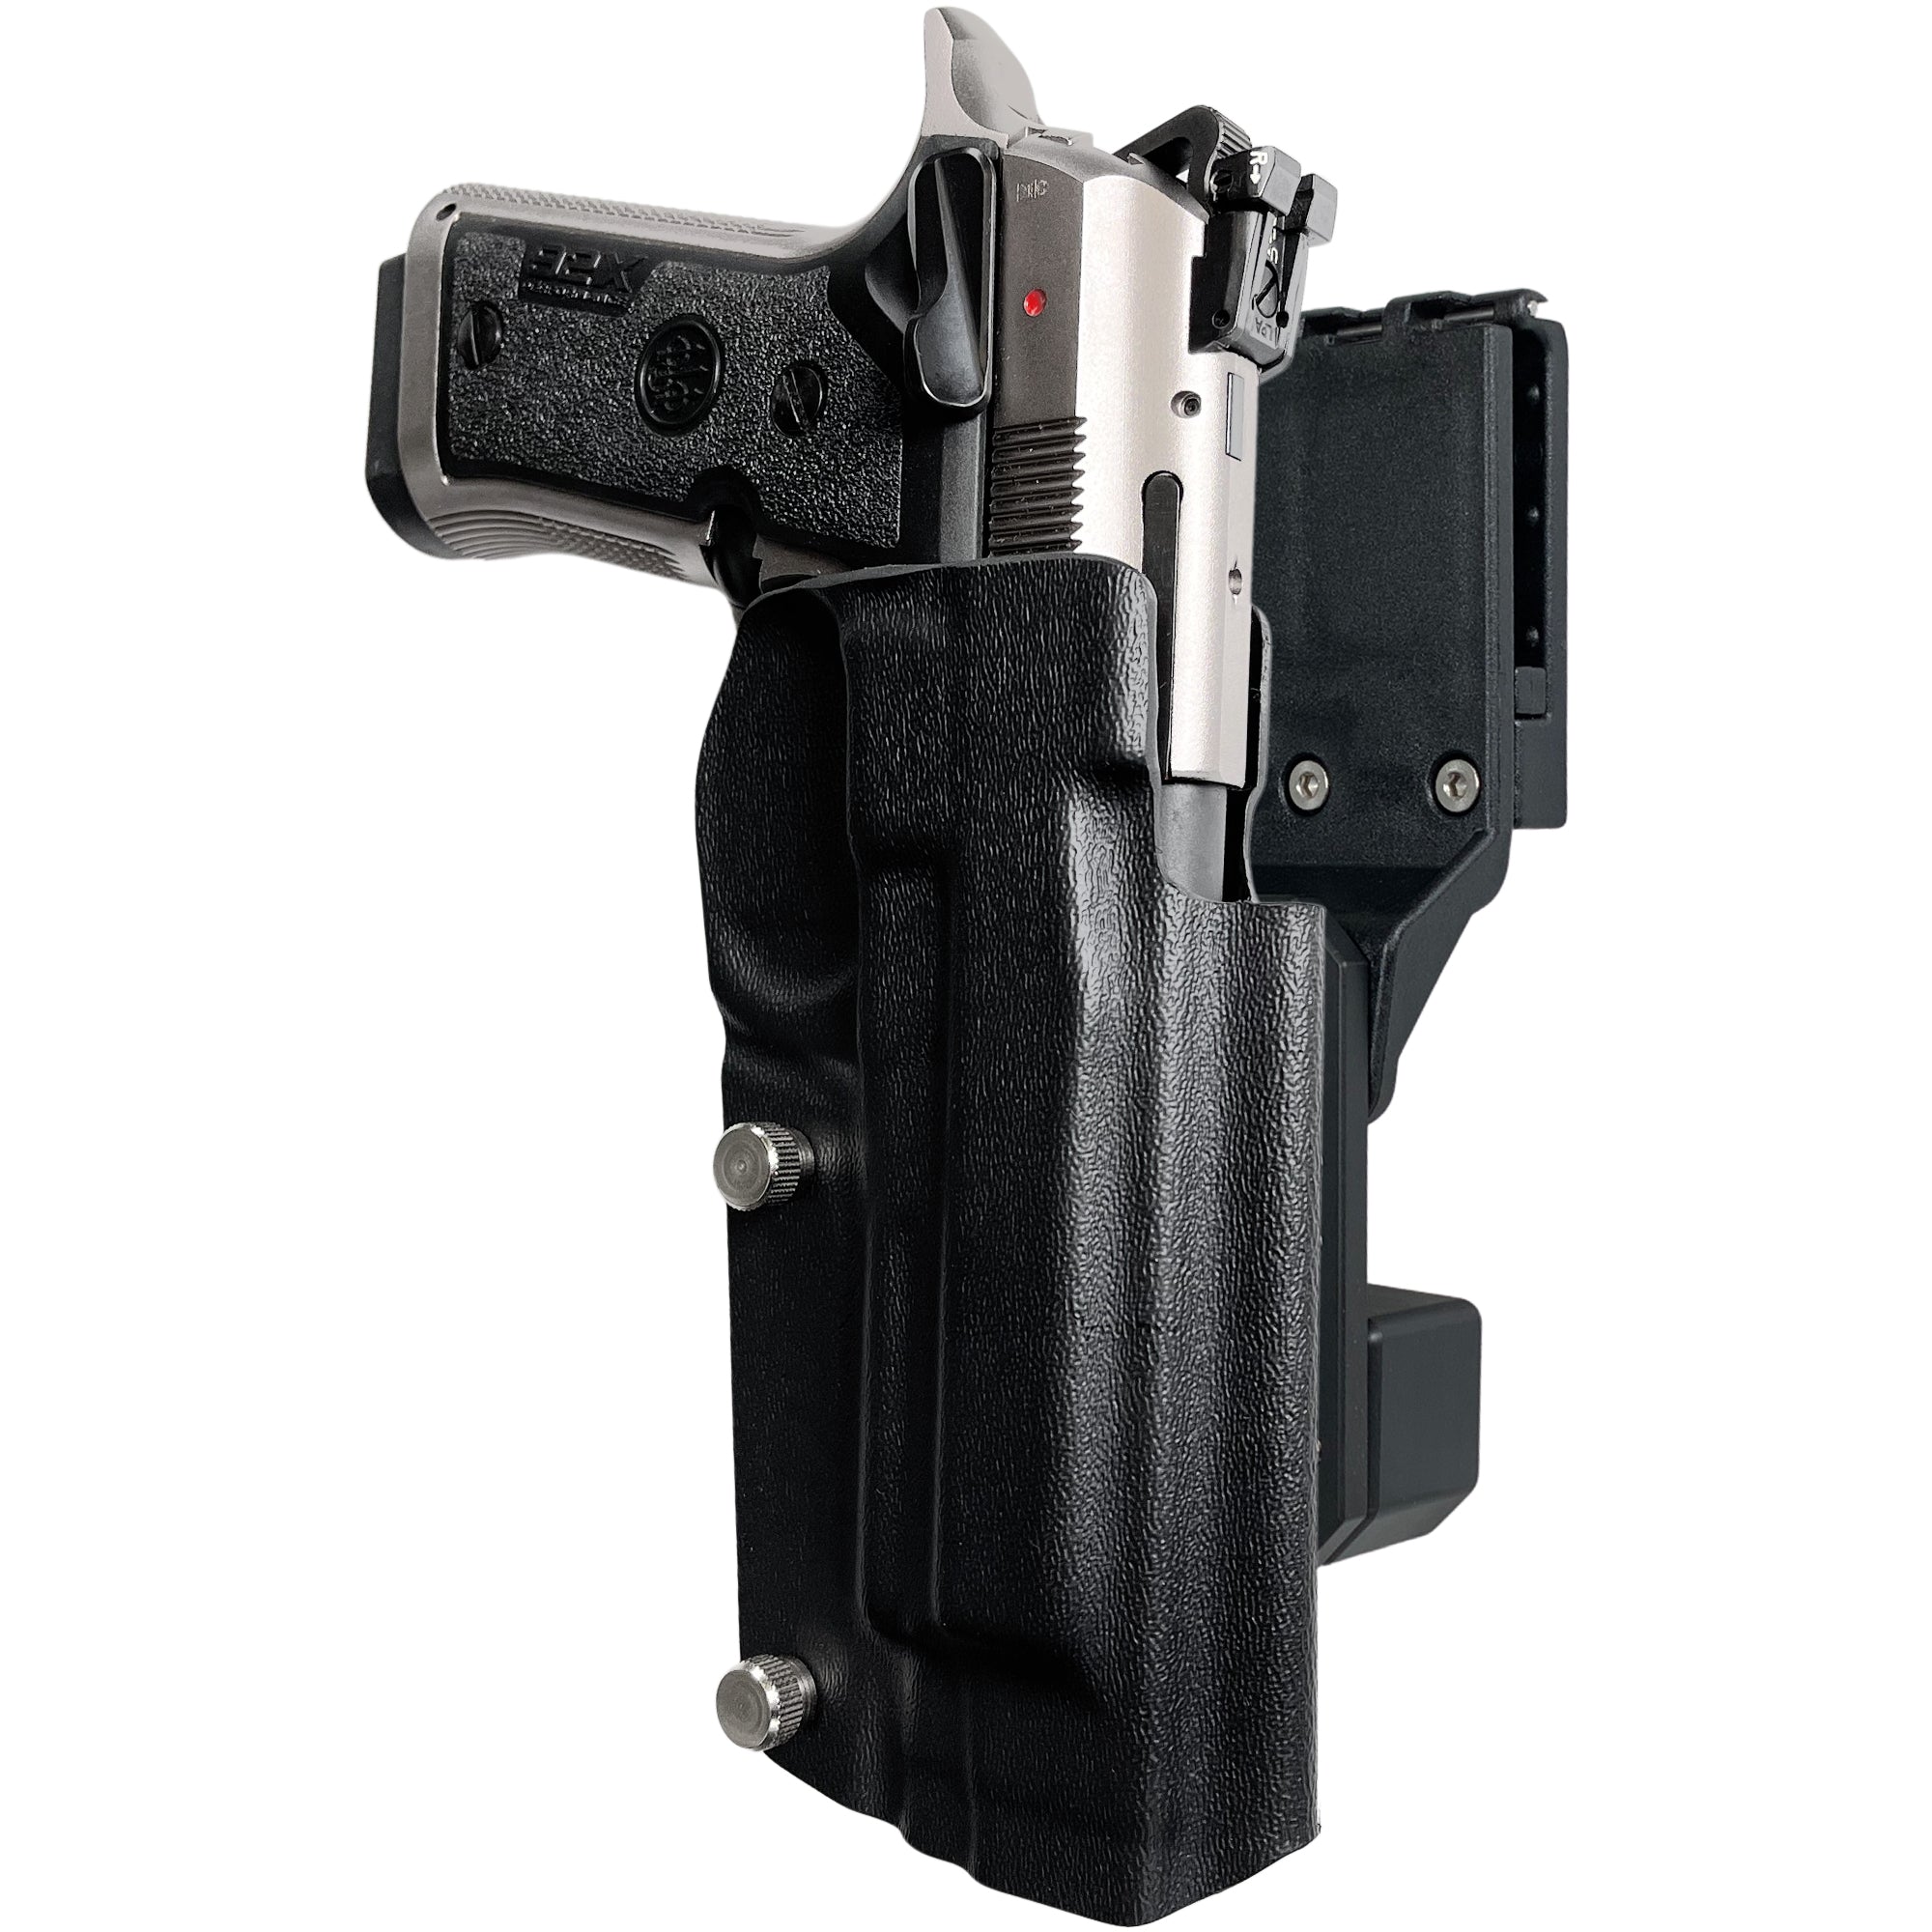 Beretta-92x-performance-pro-competition-holster-in-black-kydex-finish